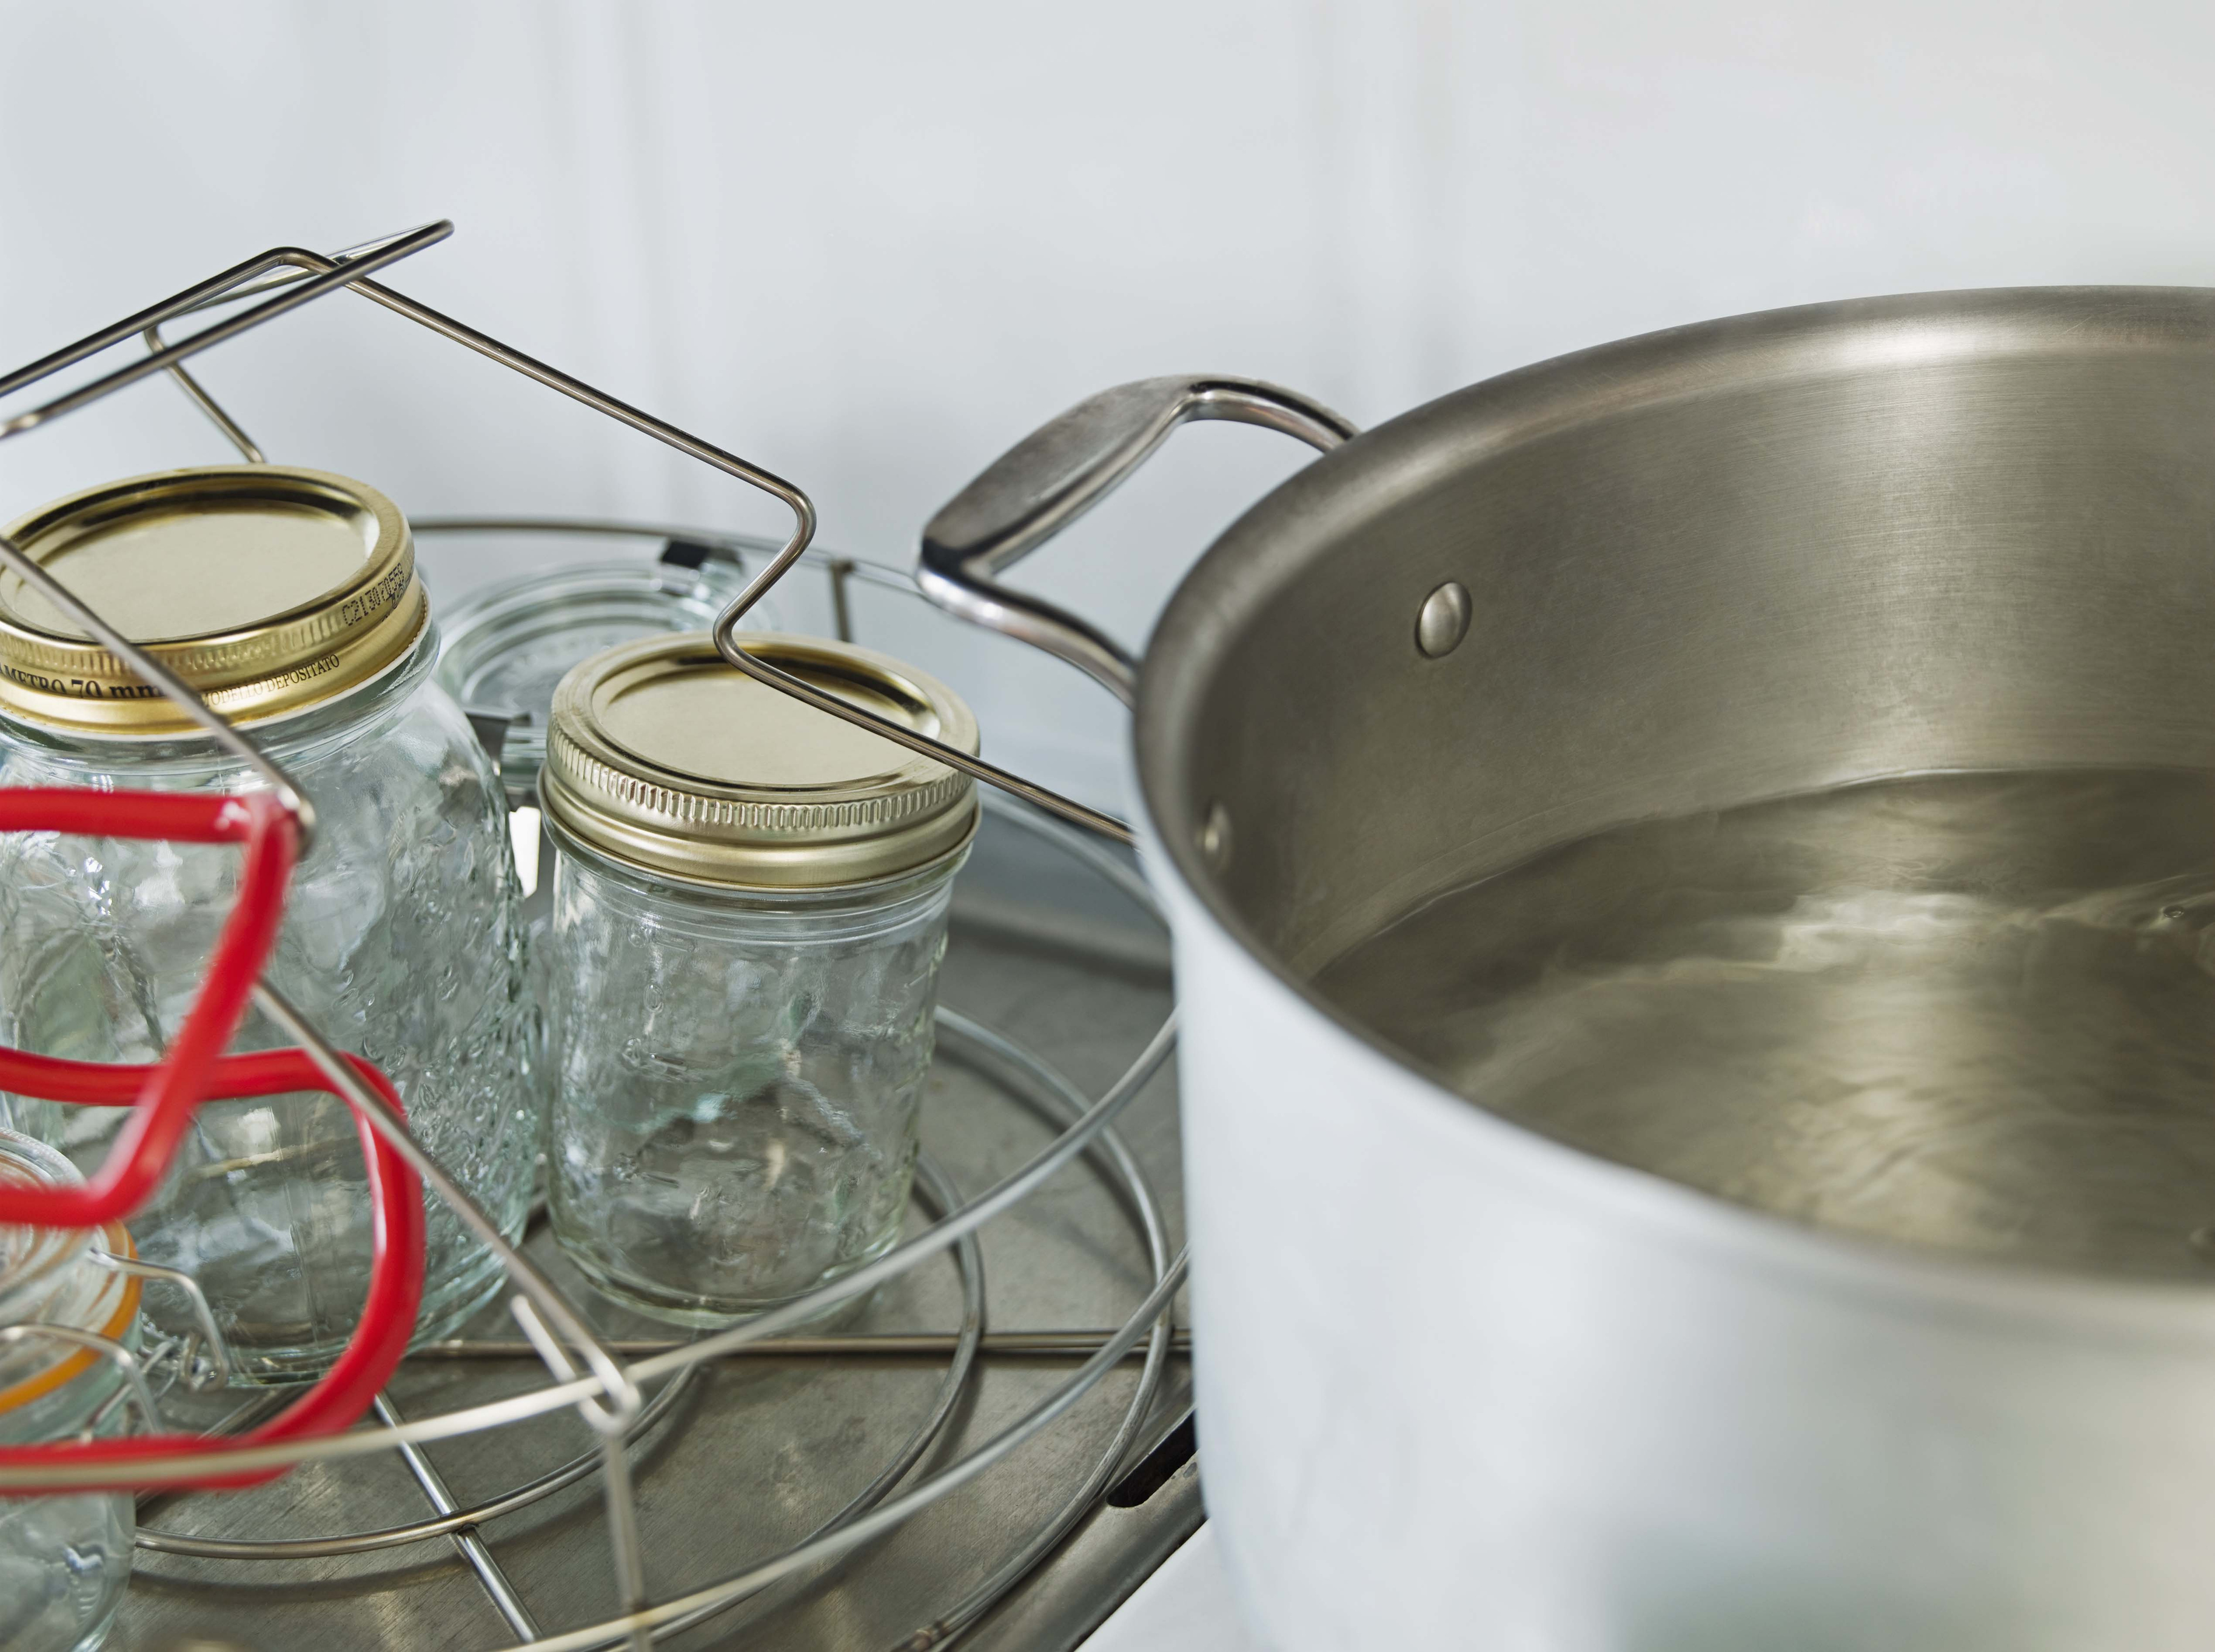 Home canning supplies